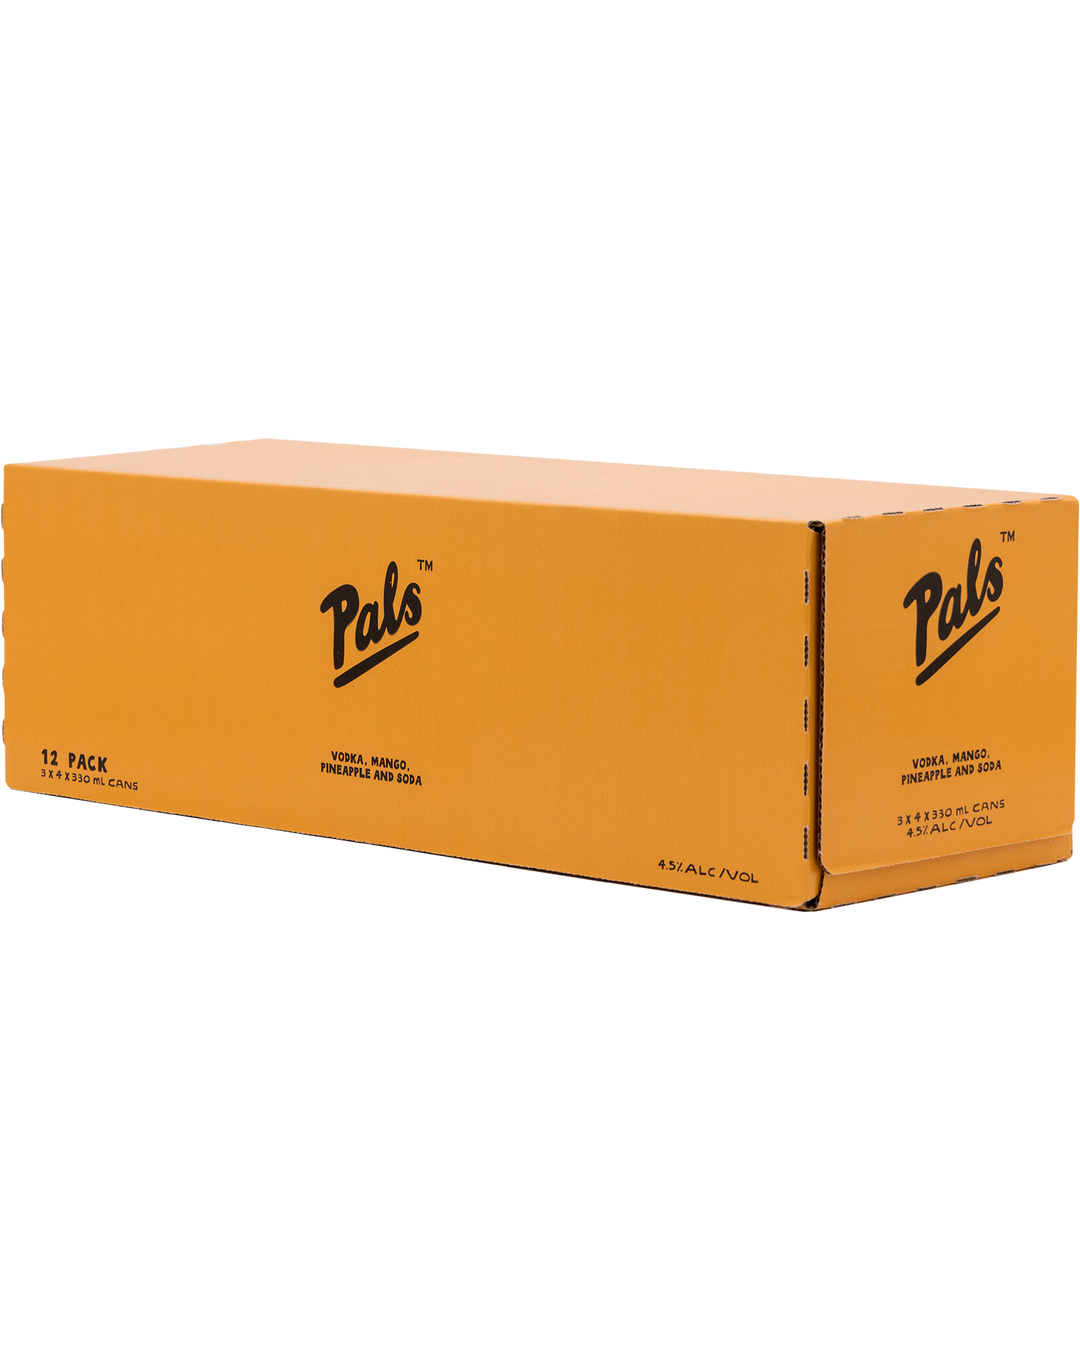 Pals Vodka Mango and Pineapple 4.5% 10x330ml Cans